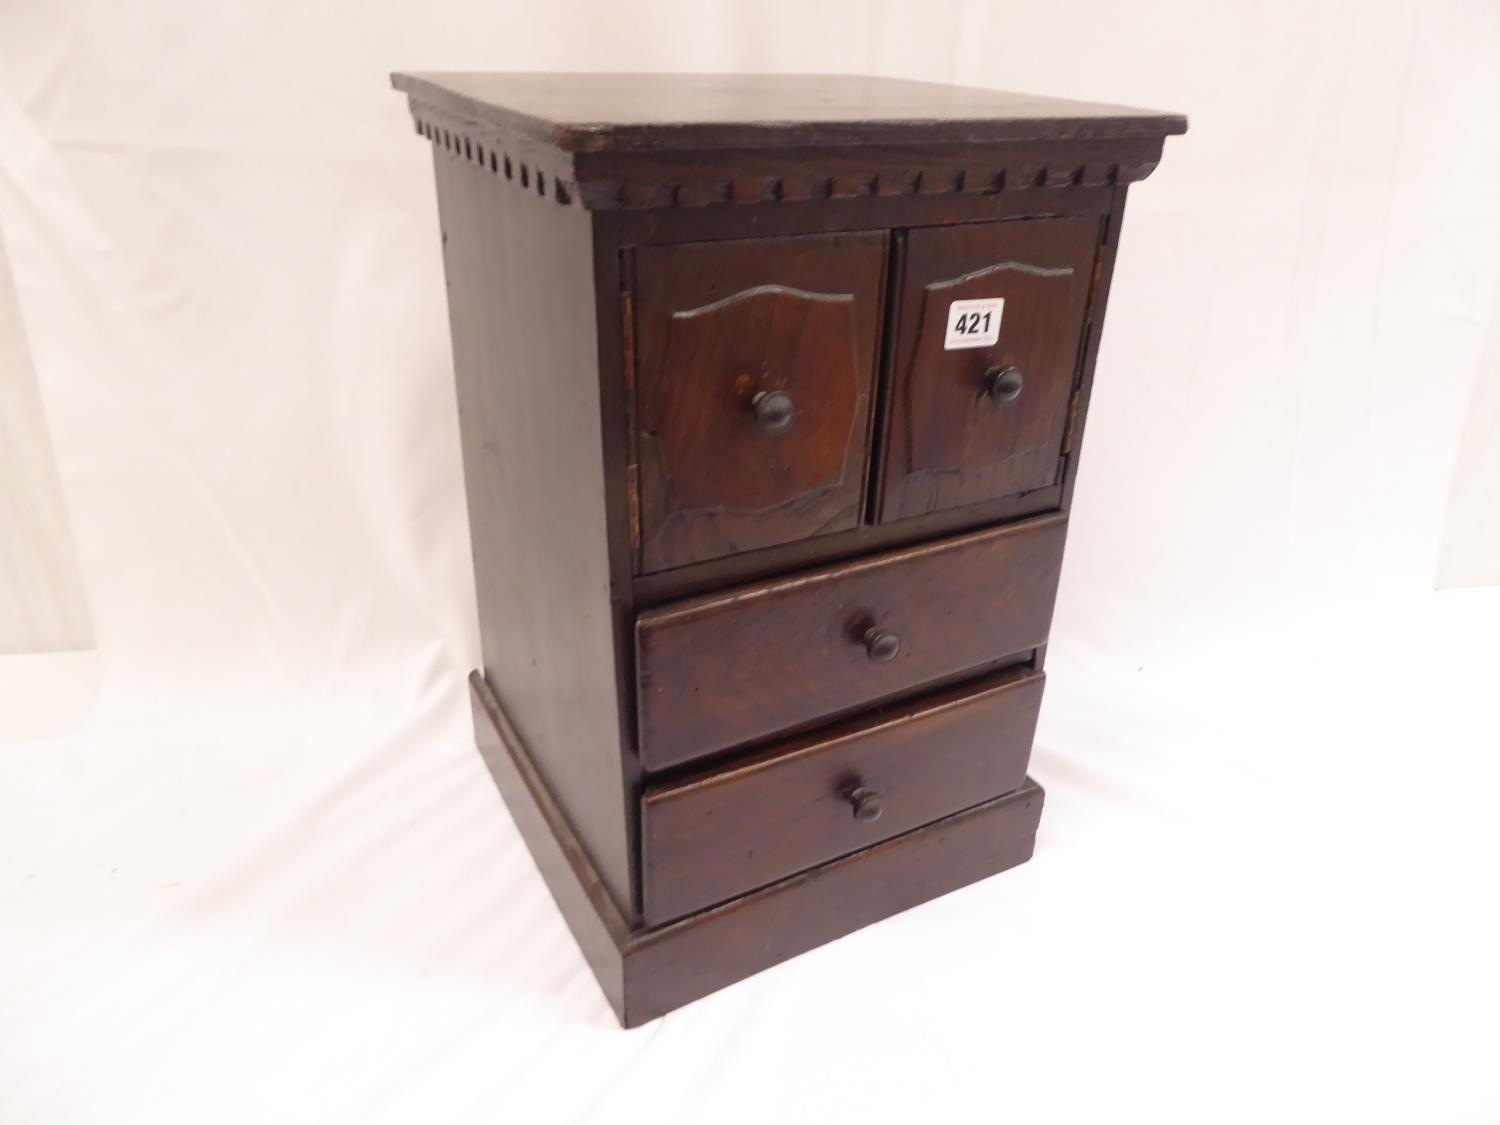 Black forest smokers cabinet ( 18" x 12" x 12")